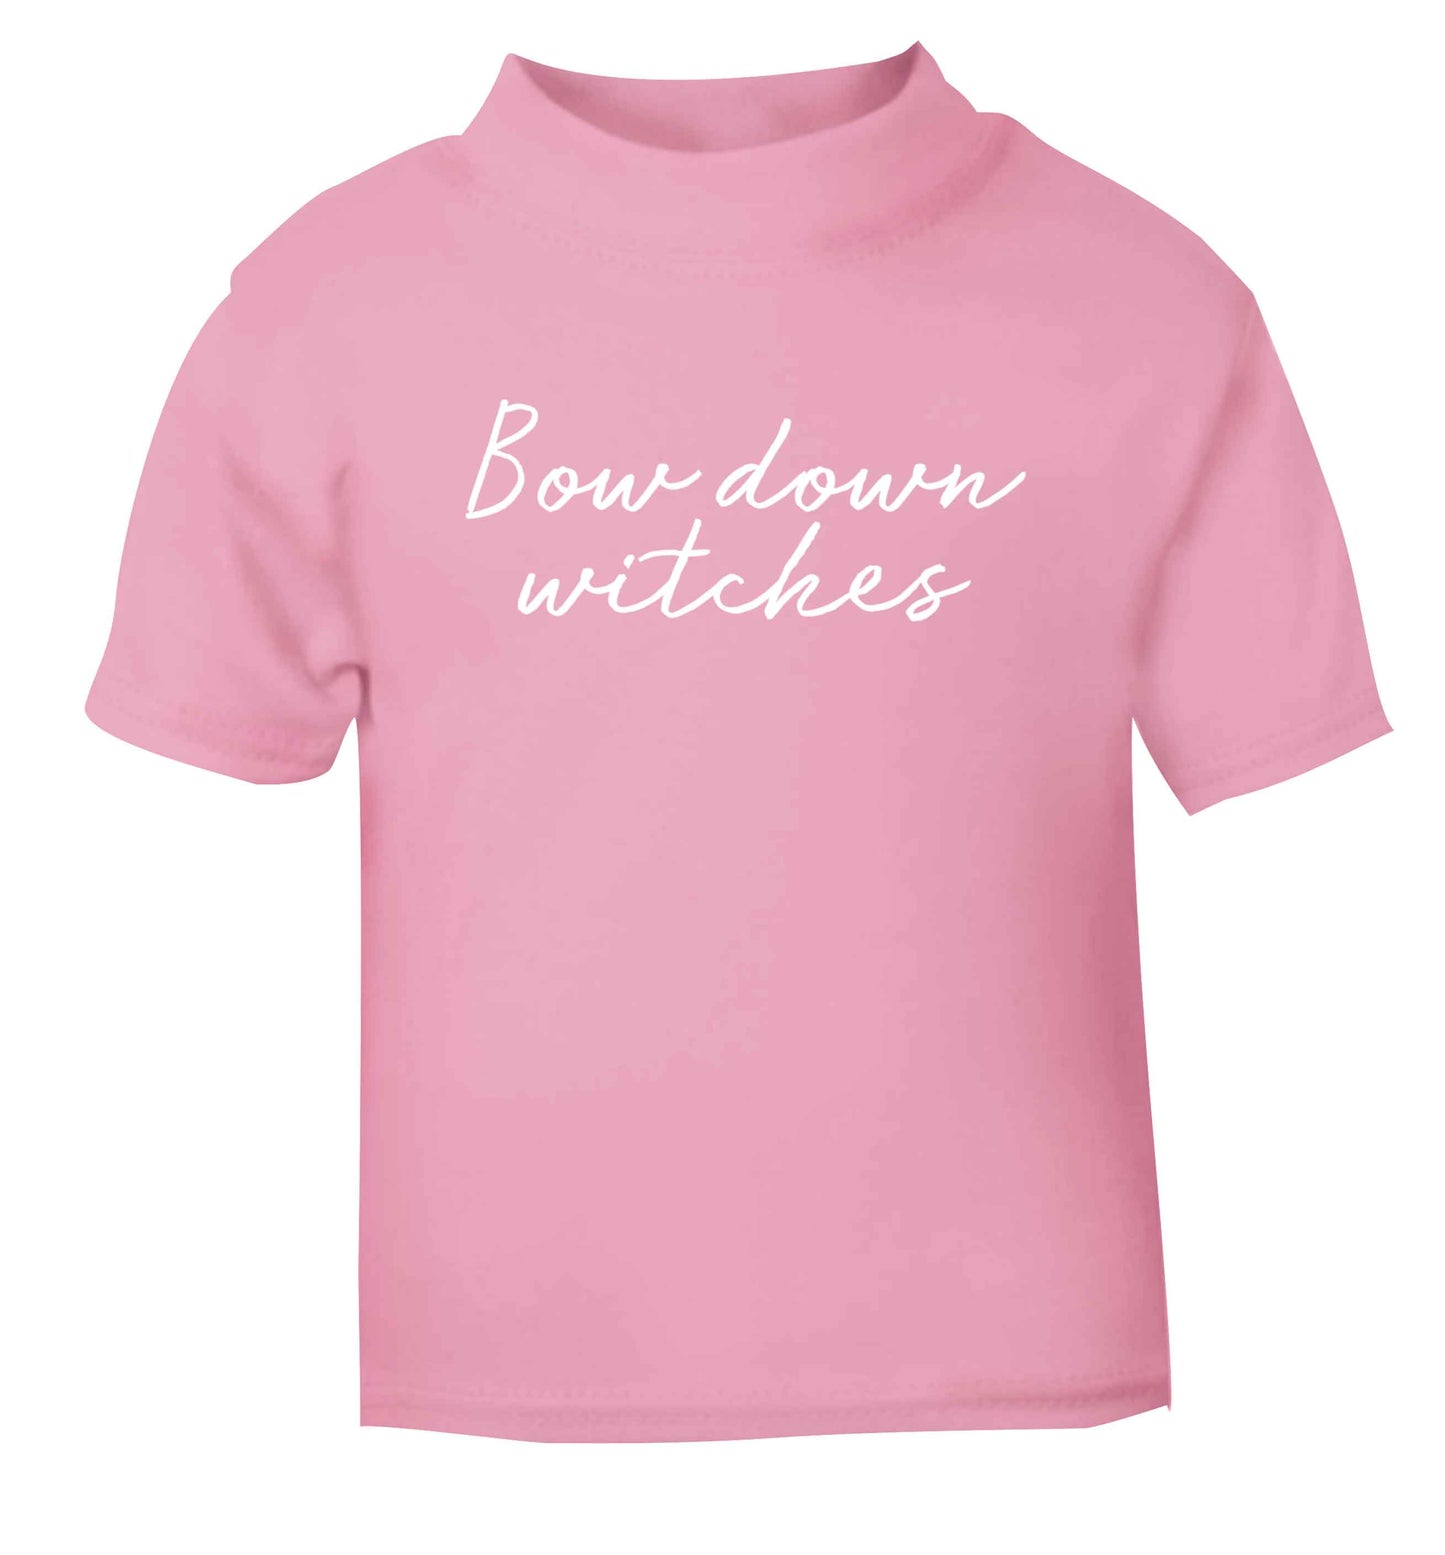 Bow down witches light pink baby toddler Tshirt 2 Years